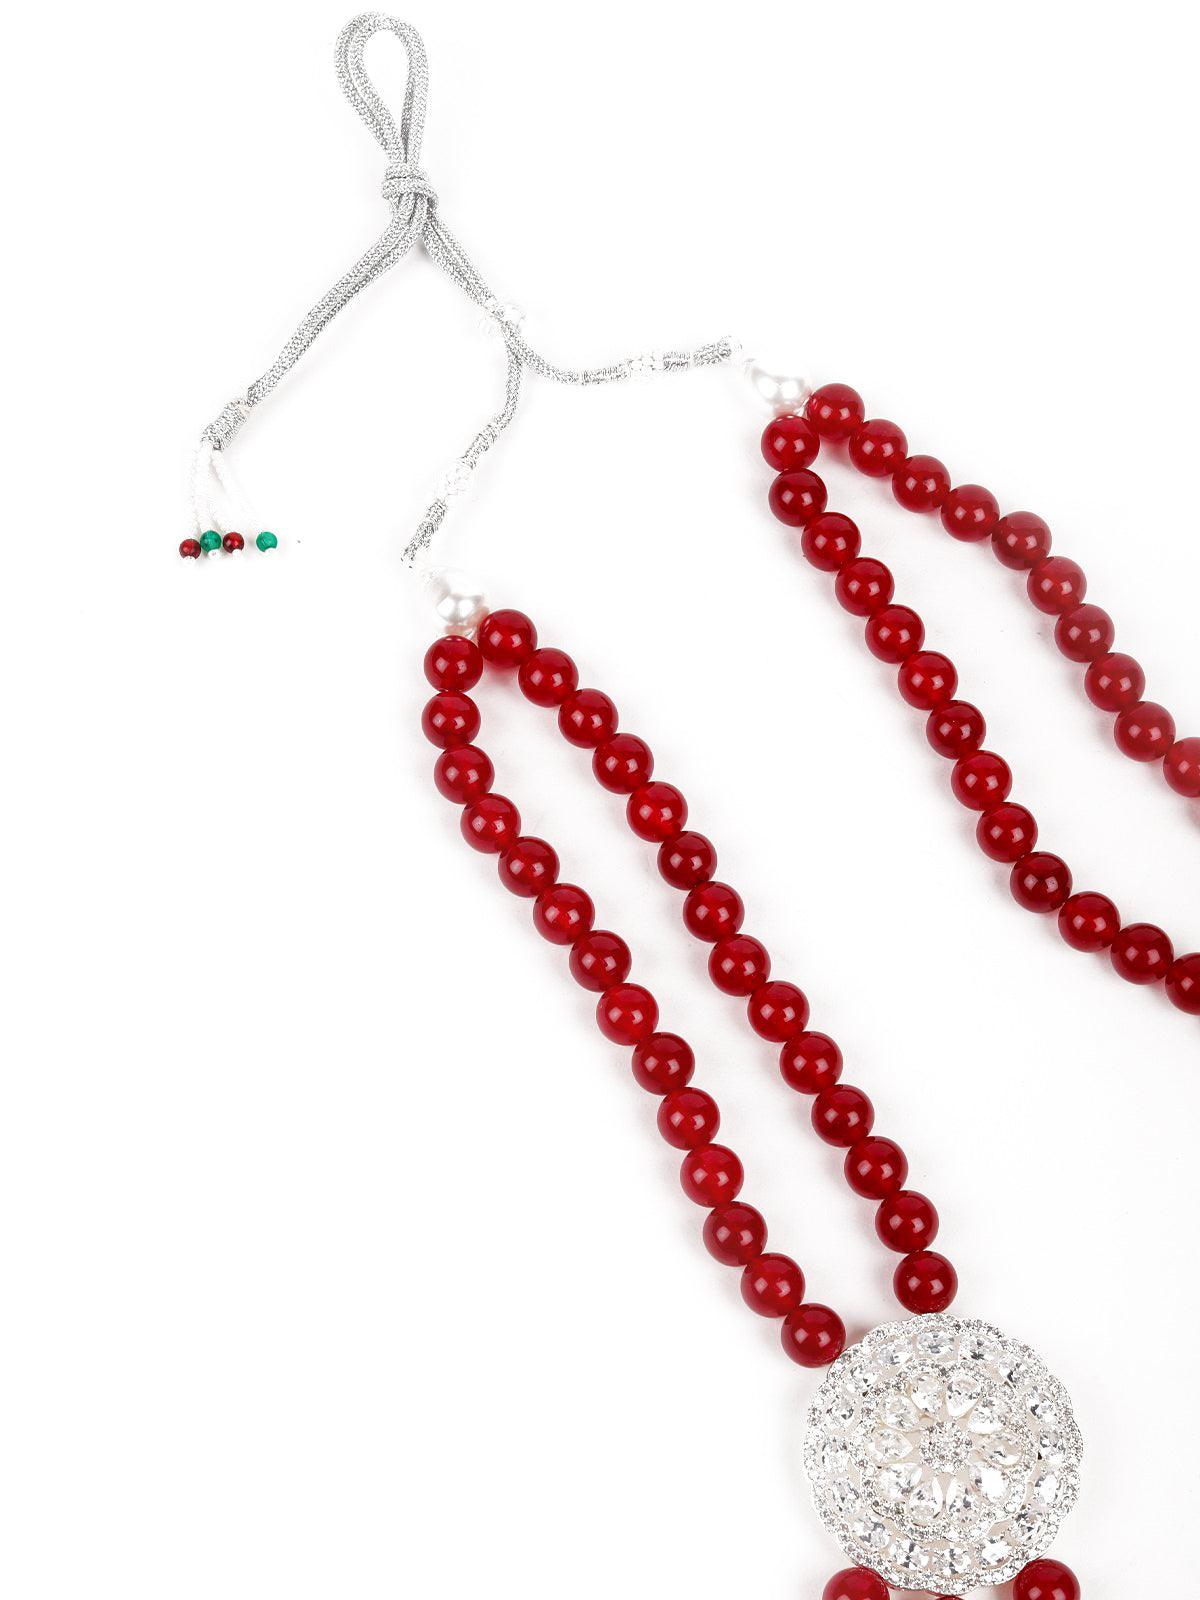 Ruby Onyx Beads Loop Necklace Set With Silver Embellishments - Odette